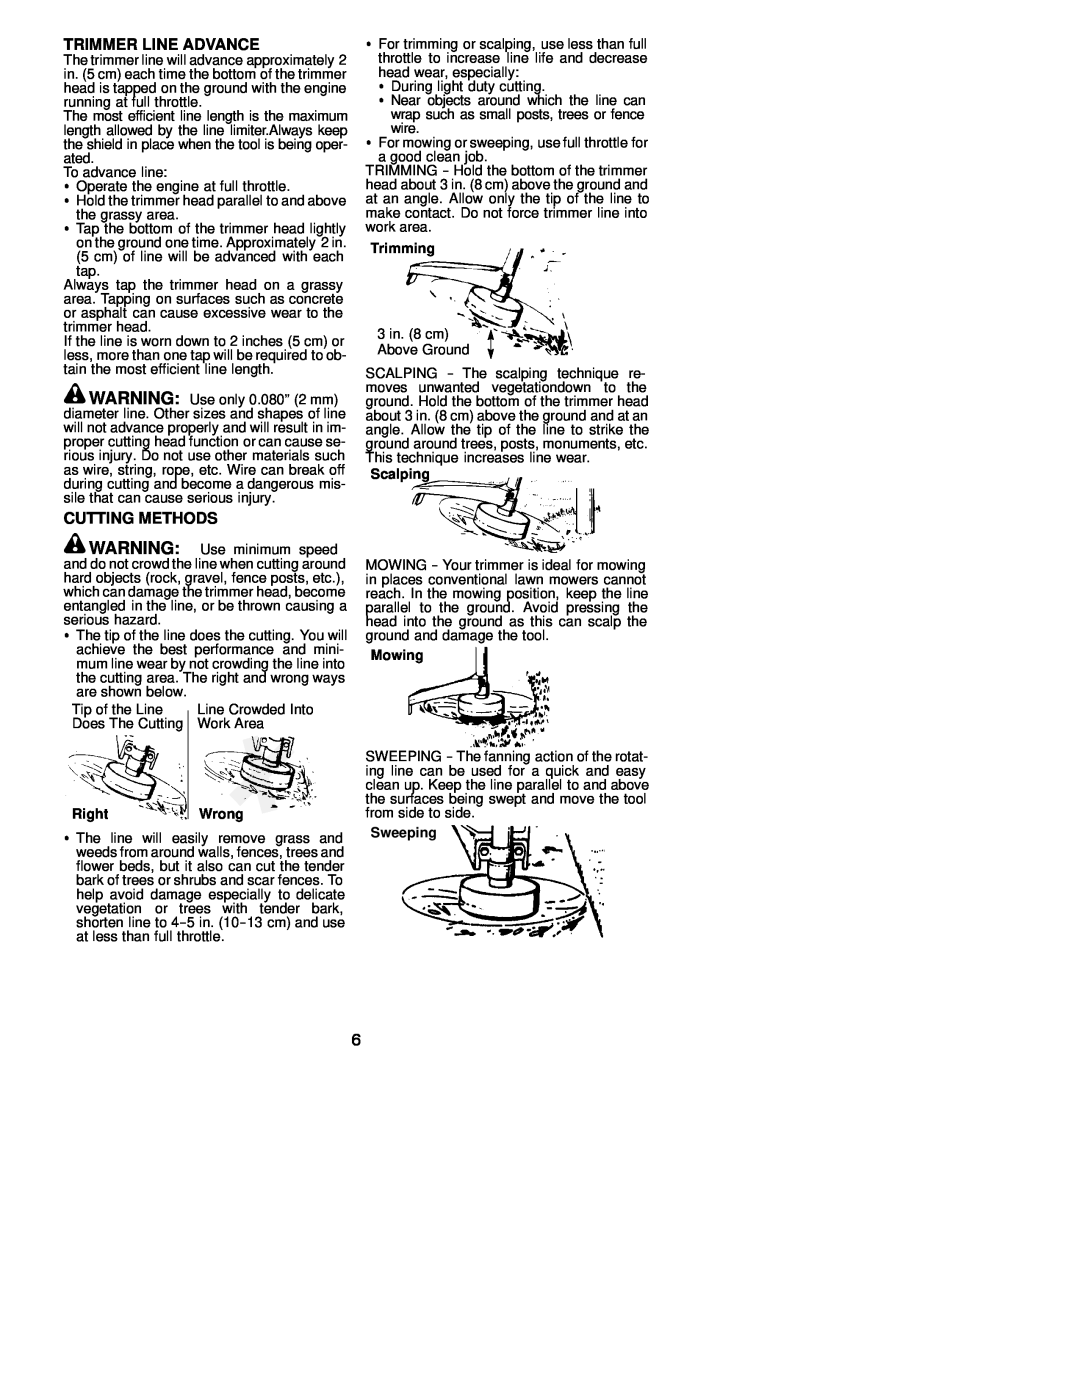 Weed Eater 530163479 instruction manual Trimmer Line Advance, Cutting Methods, Right, Trimming, Scalping, Mowing, Sweeping 